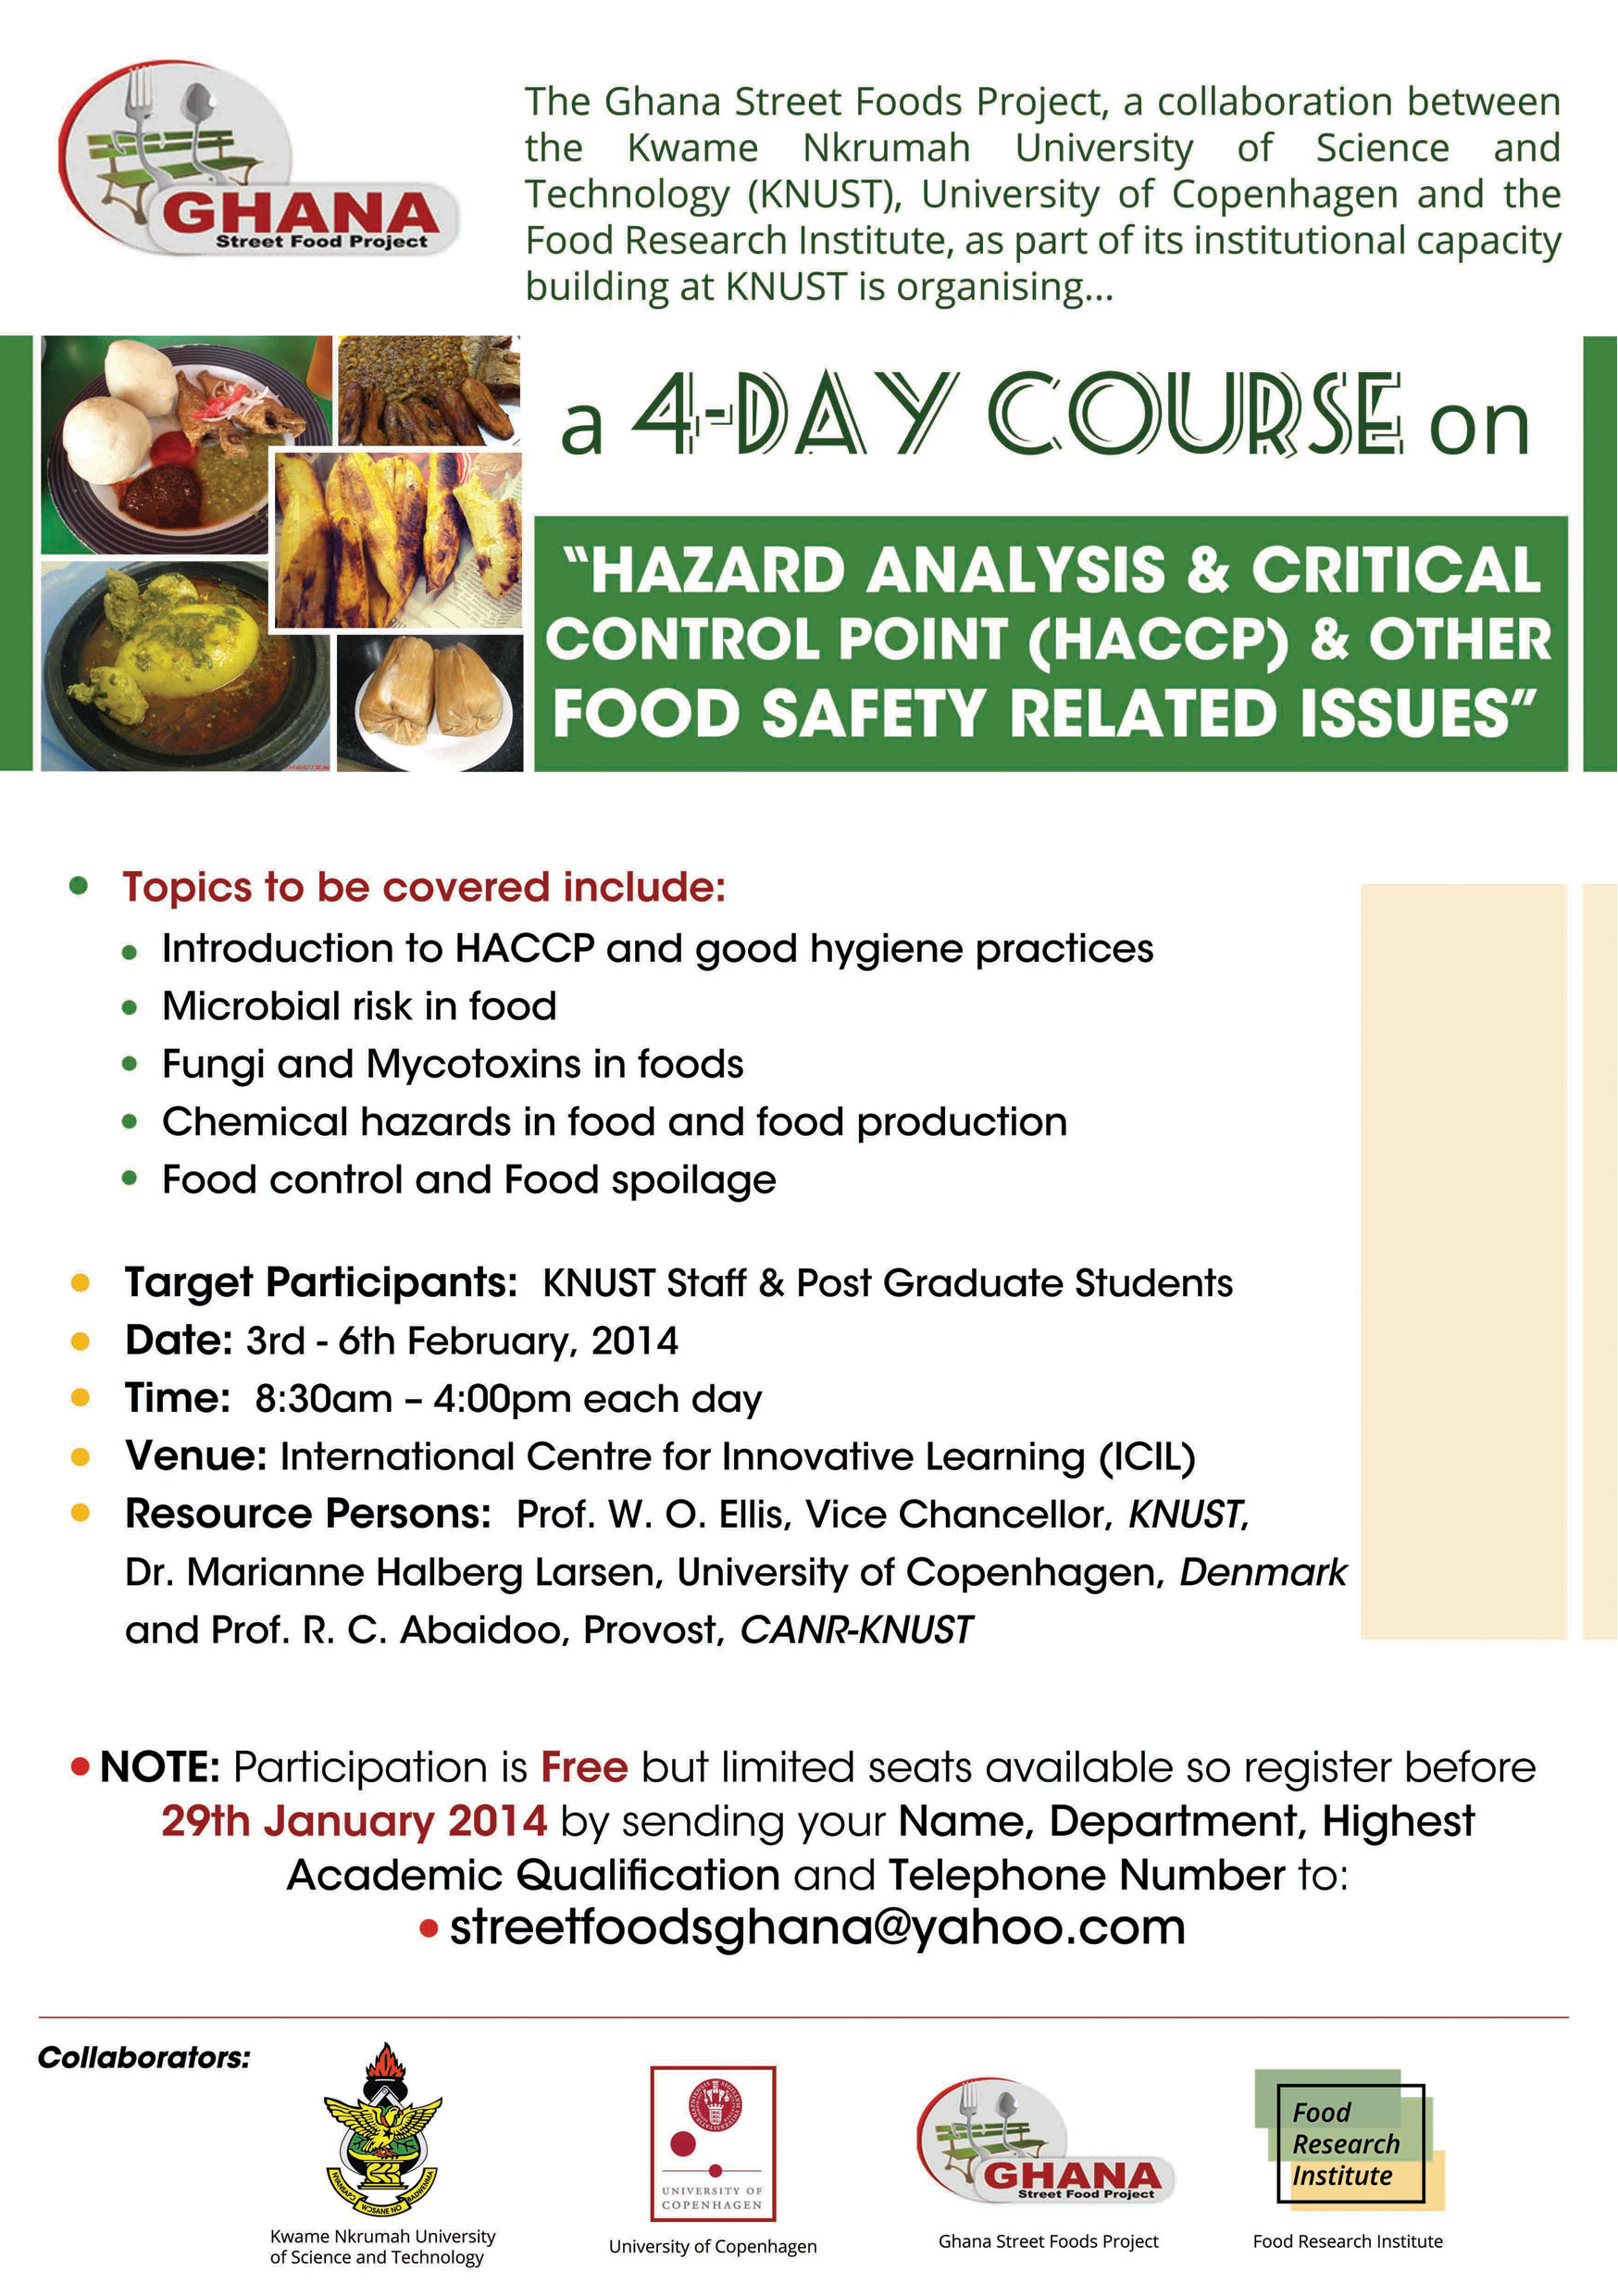 4-Day Course by Ghana Street Food Project